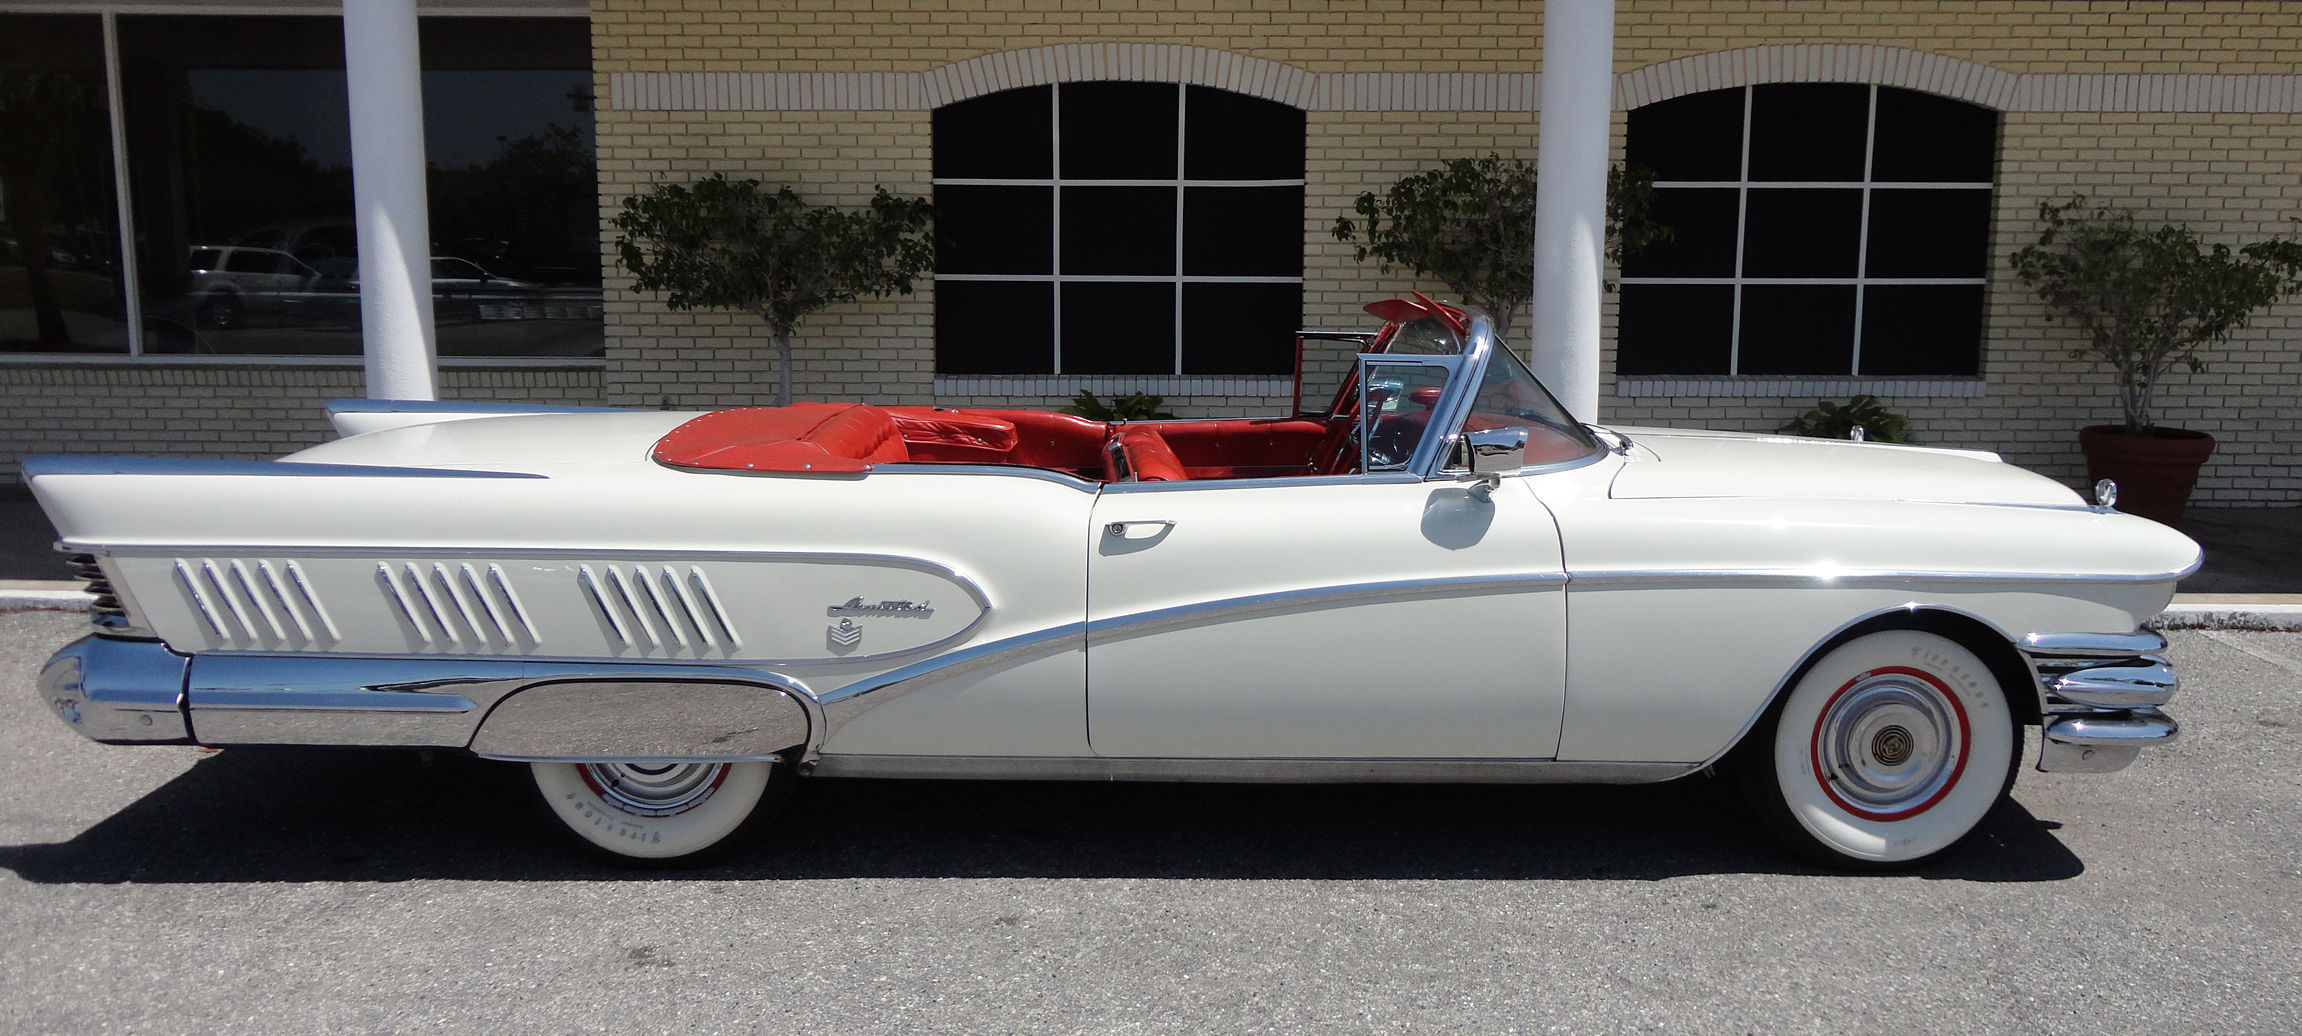 1958, Buick, Limited, Convertible, Retro, Luxury, Hs Wallpaper